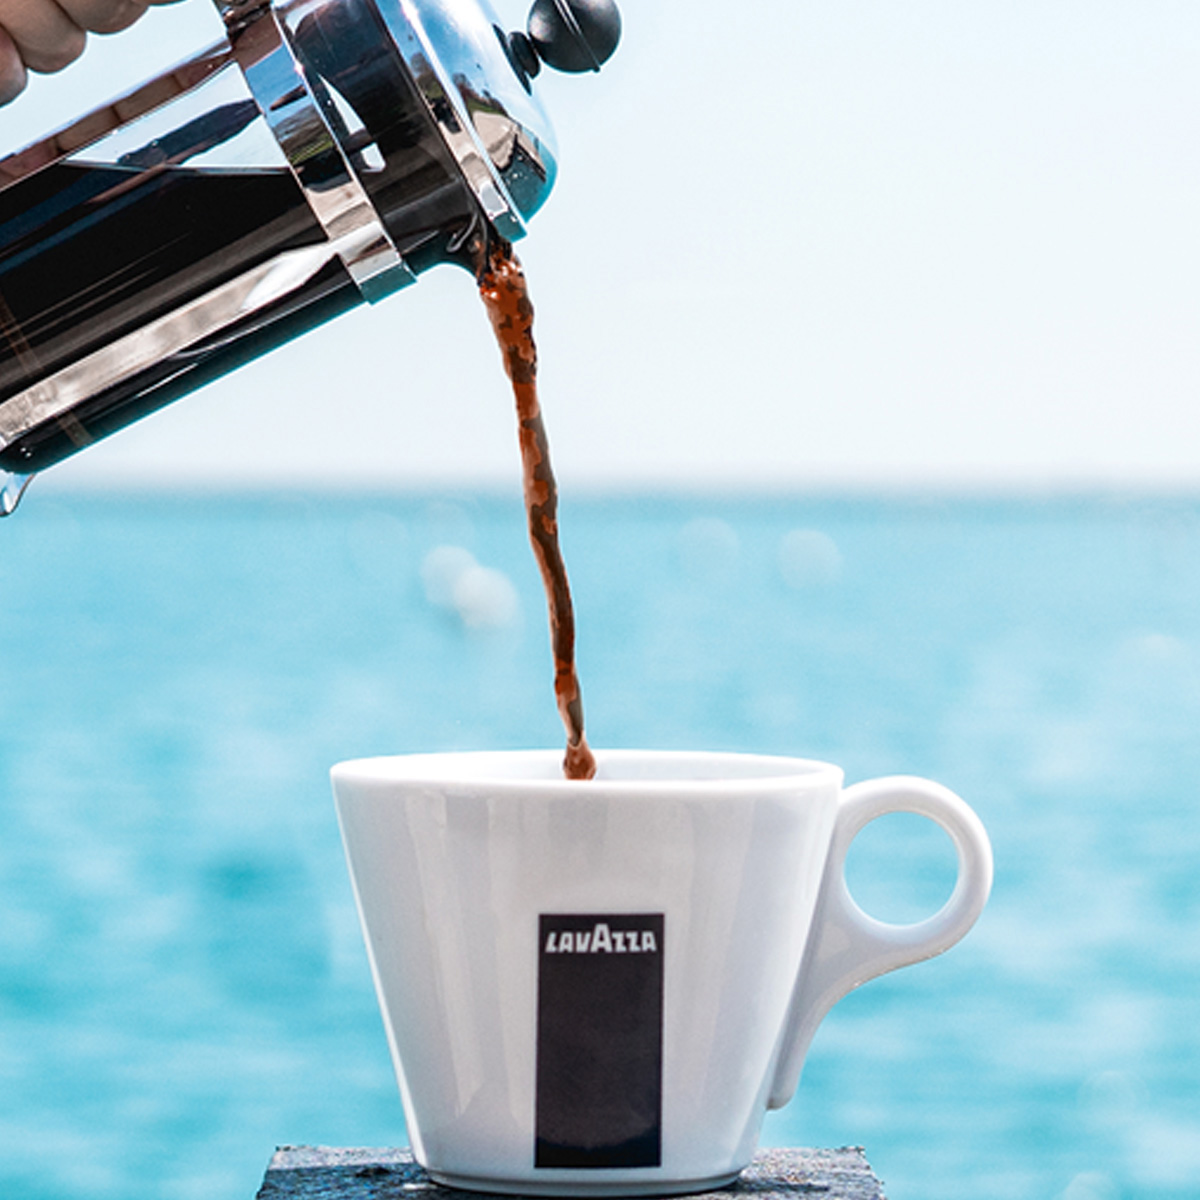 Princess Cruises and Lavazza Join Forces for an Unforgettable Coffee Experience at Sea